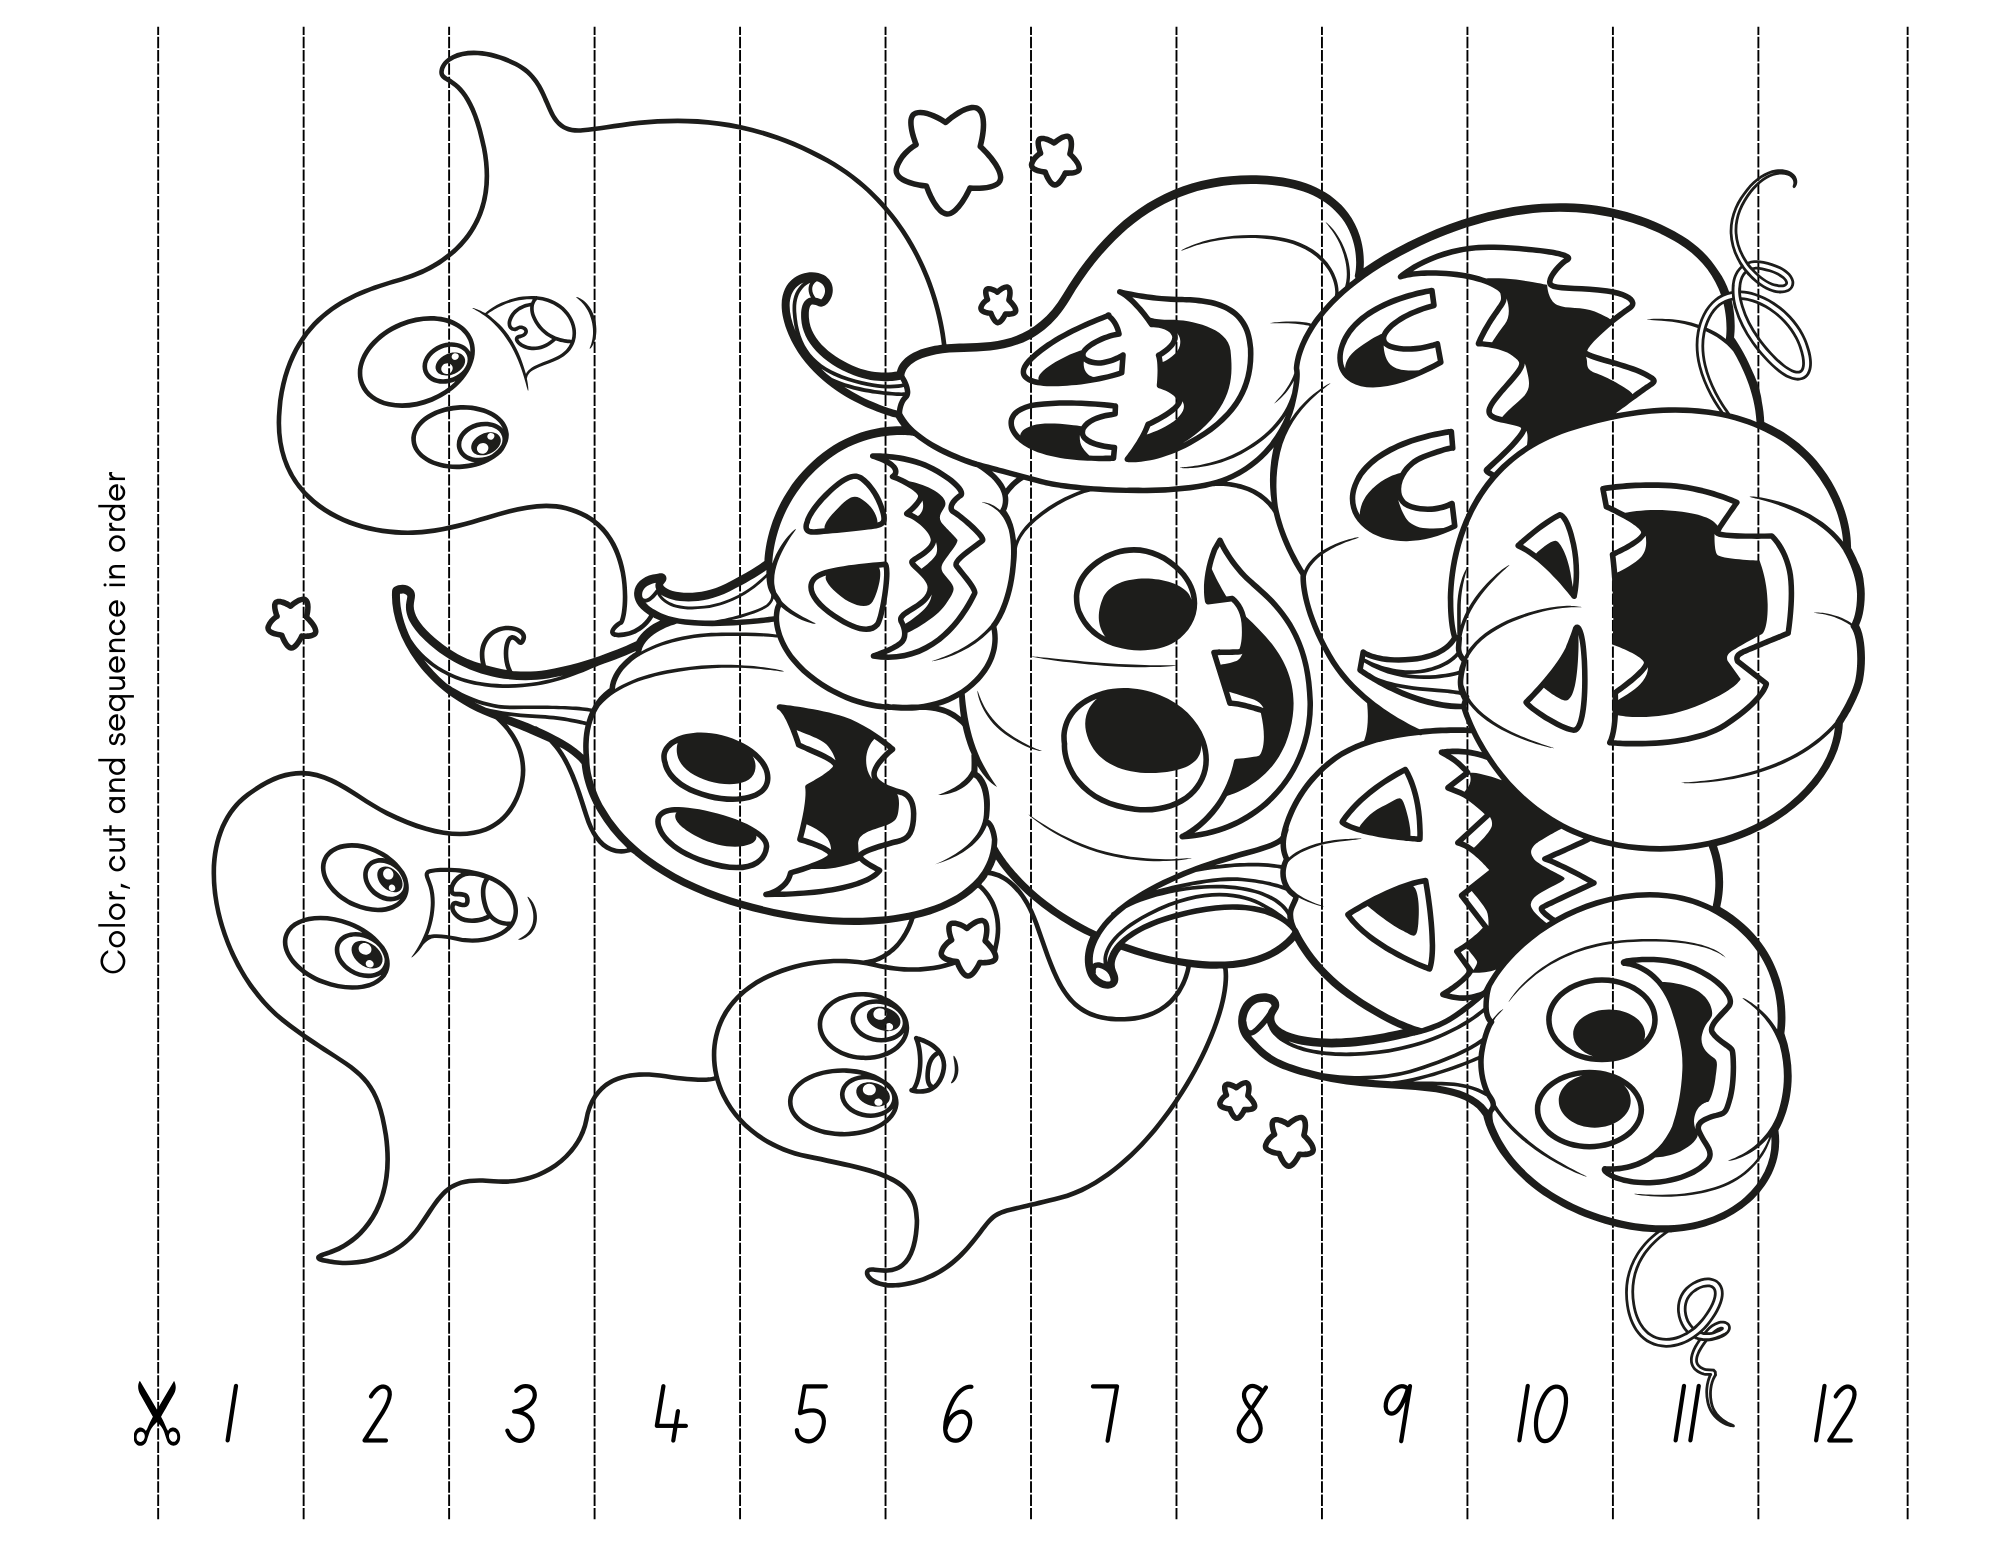 Halloween pumpkin coloring pages â coloring pages galore